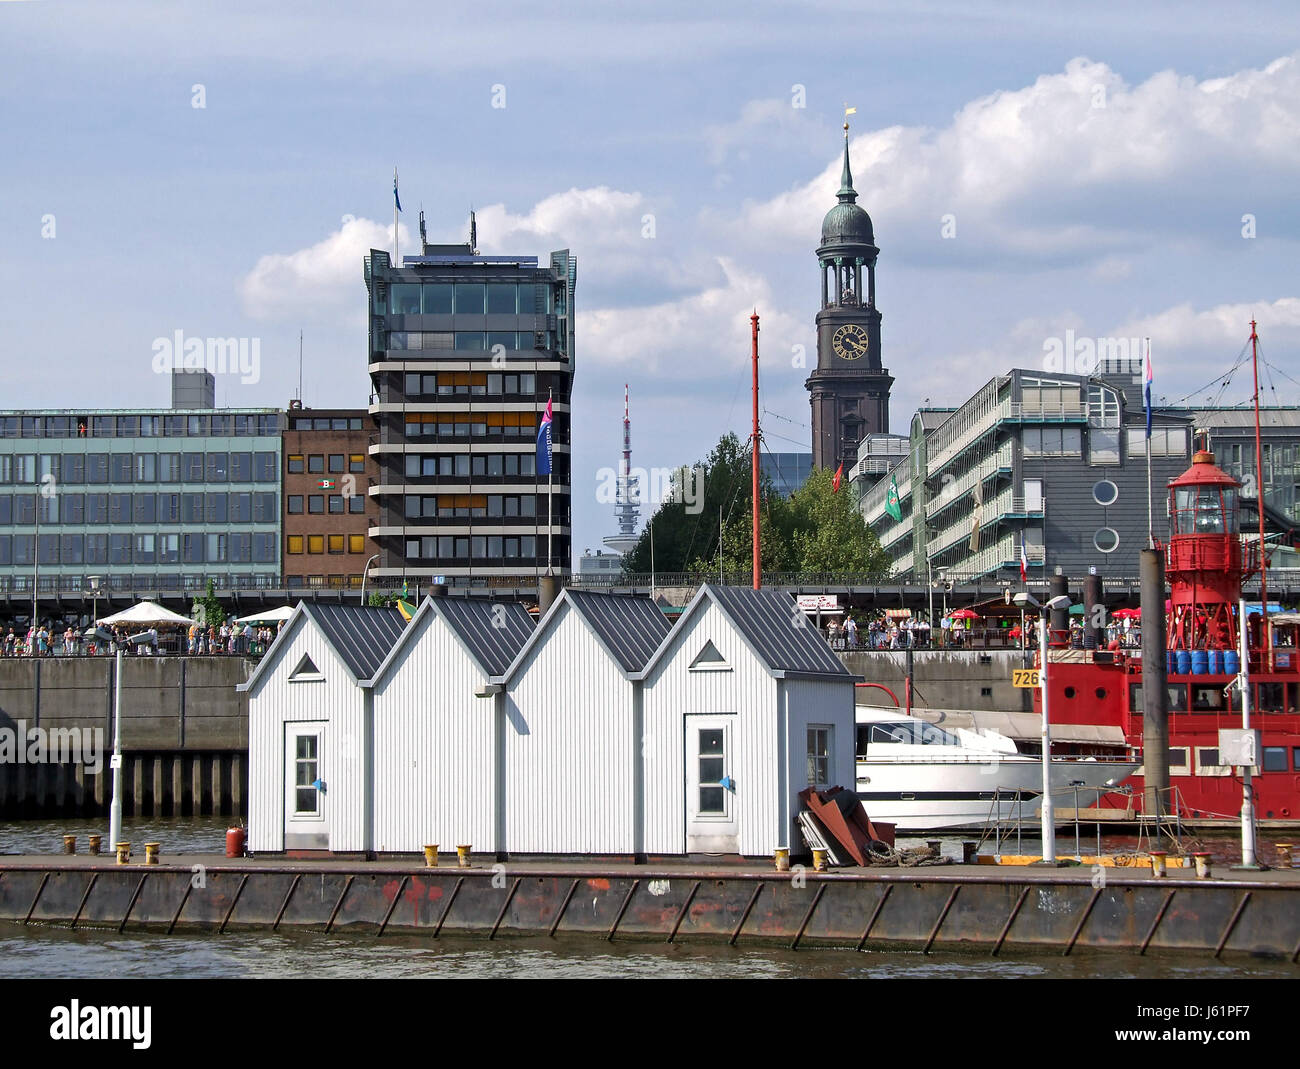 harbor hamburg Hanseatic city television tower harbours Northern Germany Stock Photo